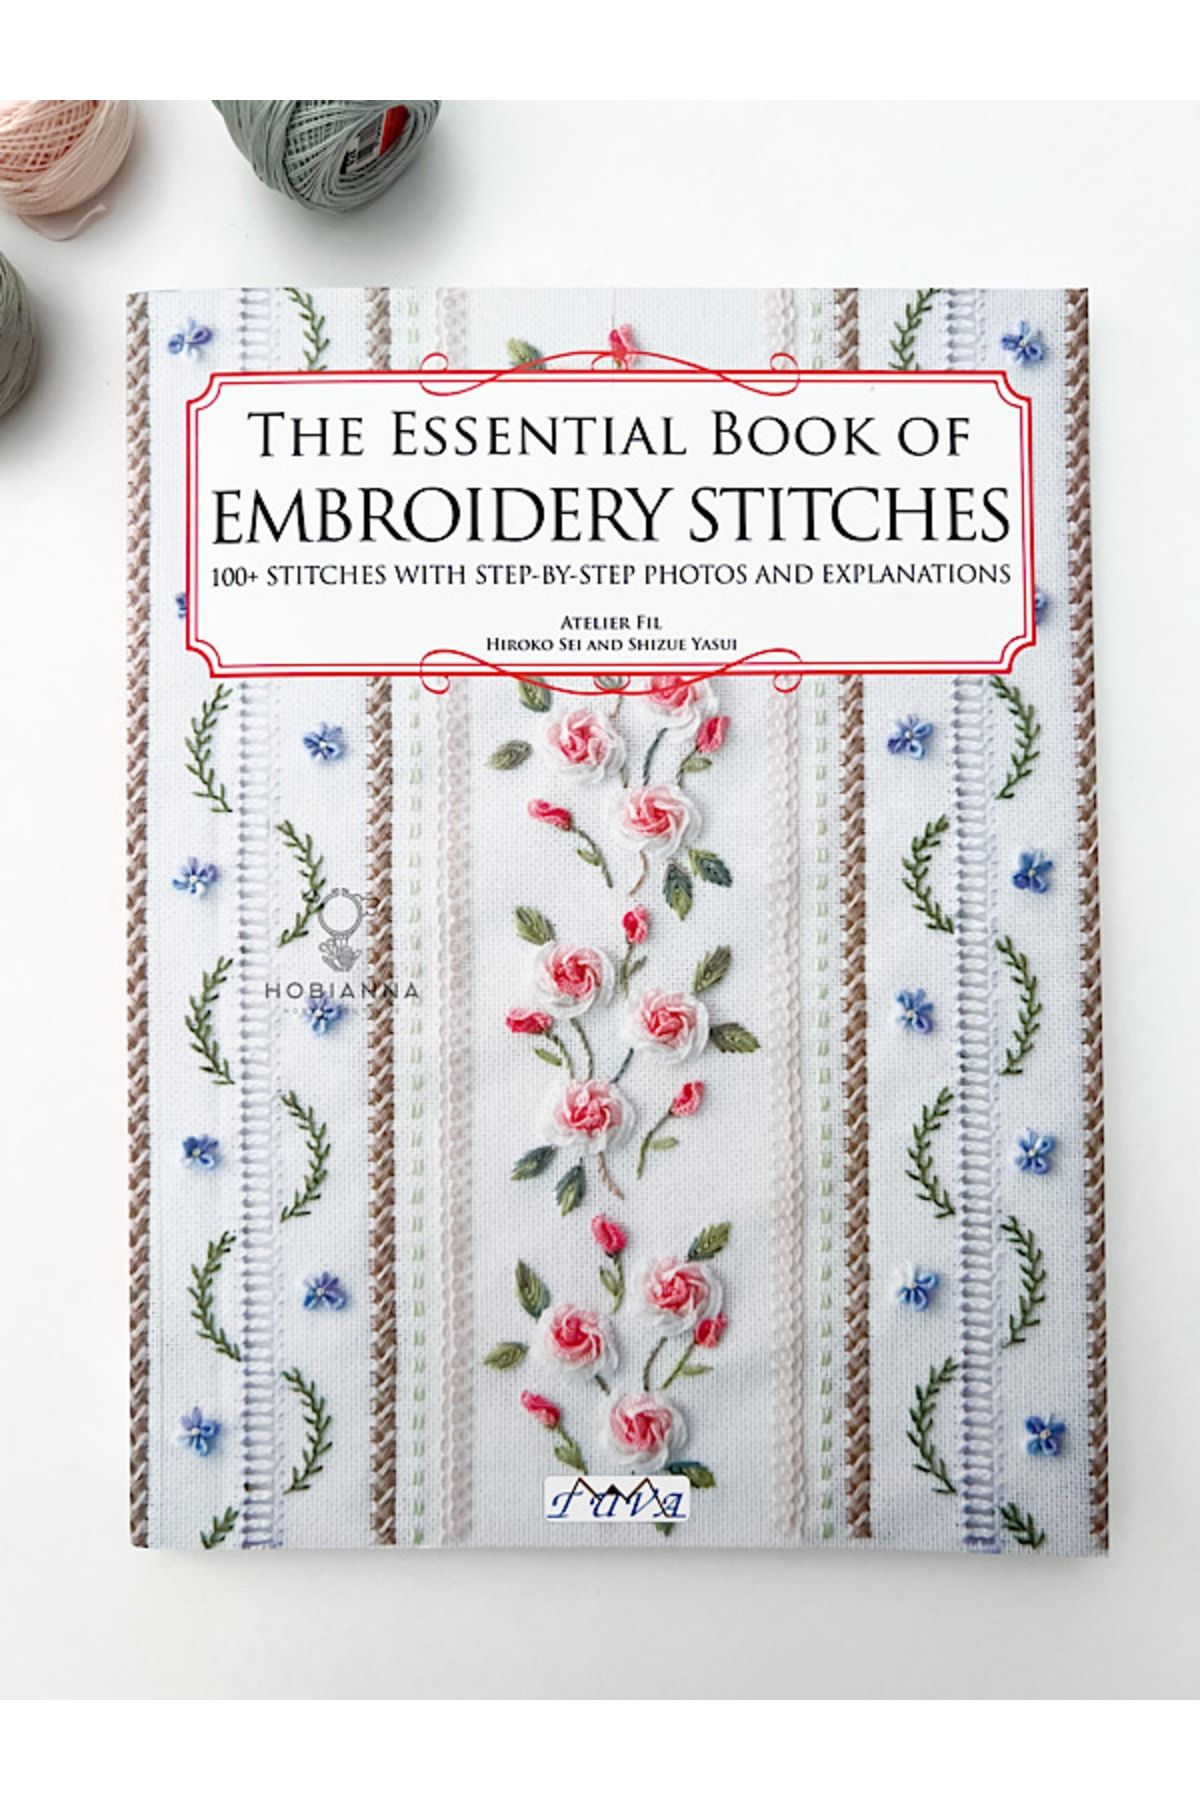 The Essential Book of Embroidery Stitches: Beautiful Hand Embroidery Stitches: 100 + Stitches with Step by Step Photos and Explanations [Book]